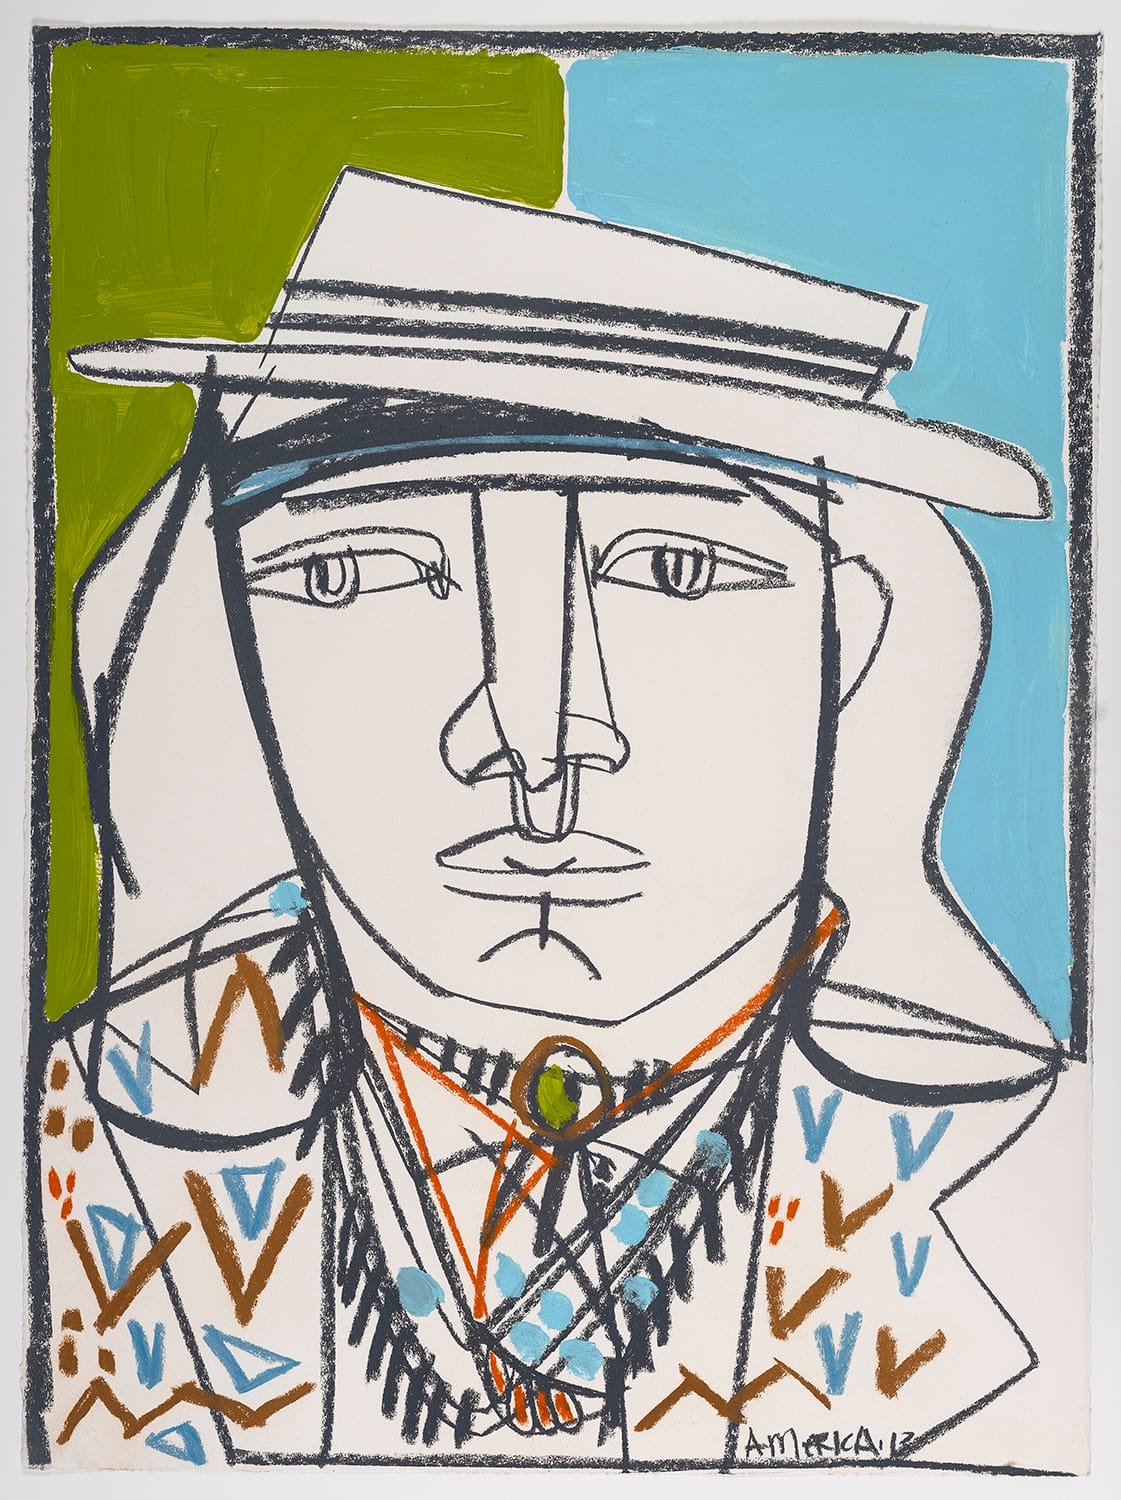 Man with the Bolo Tie and Kerchief_America Martin_Pastel and Ink on Cotton Paper_30 x 22.25